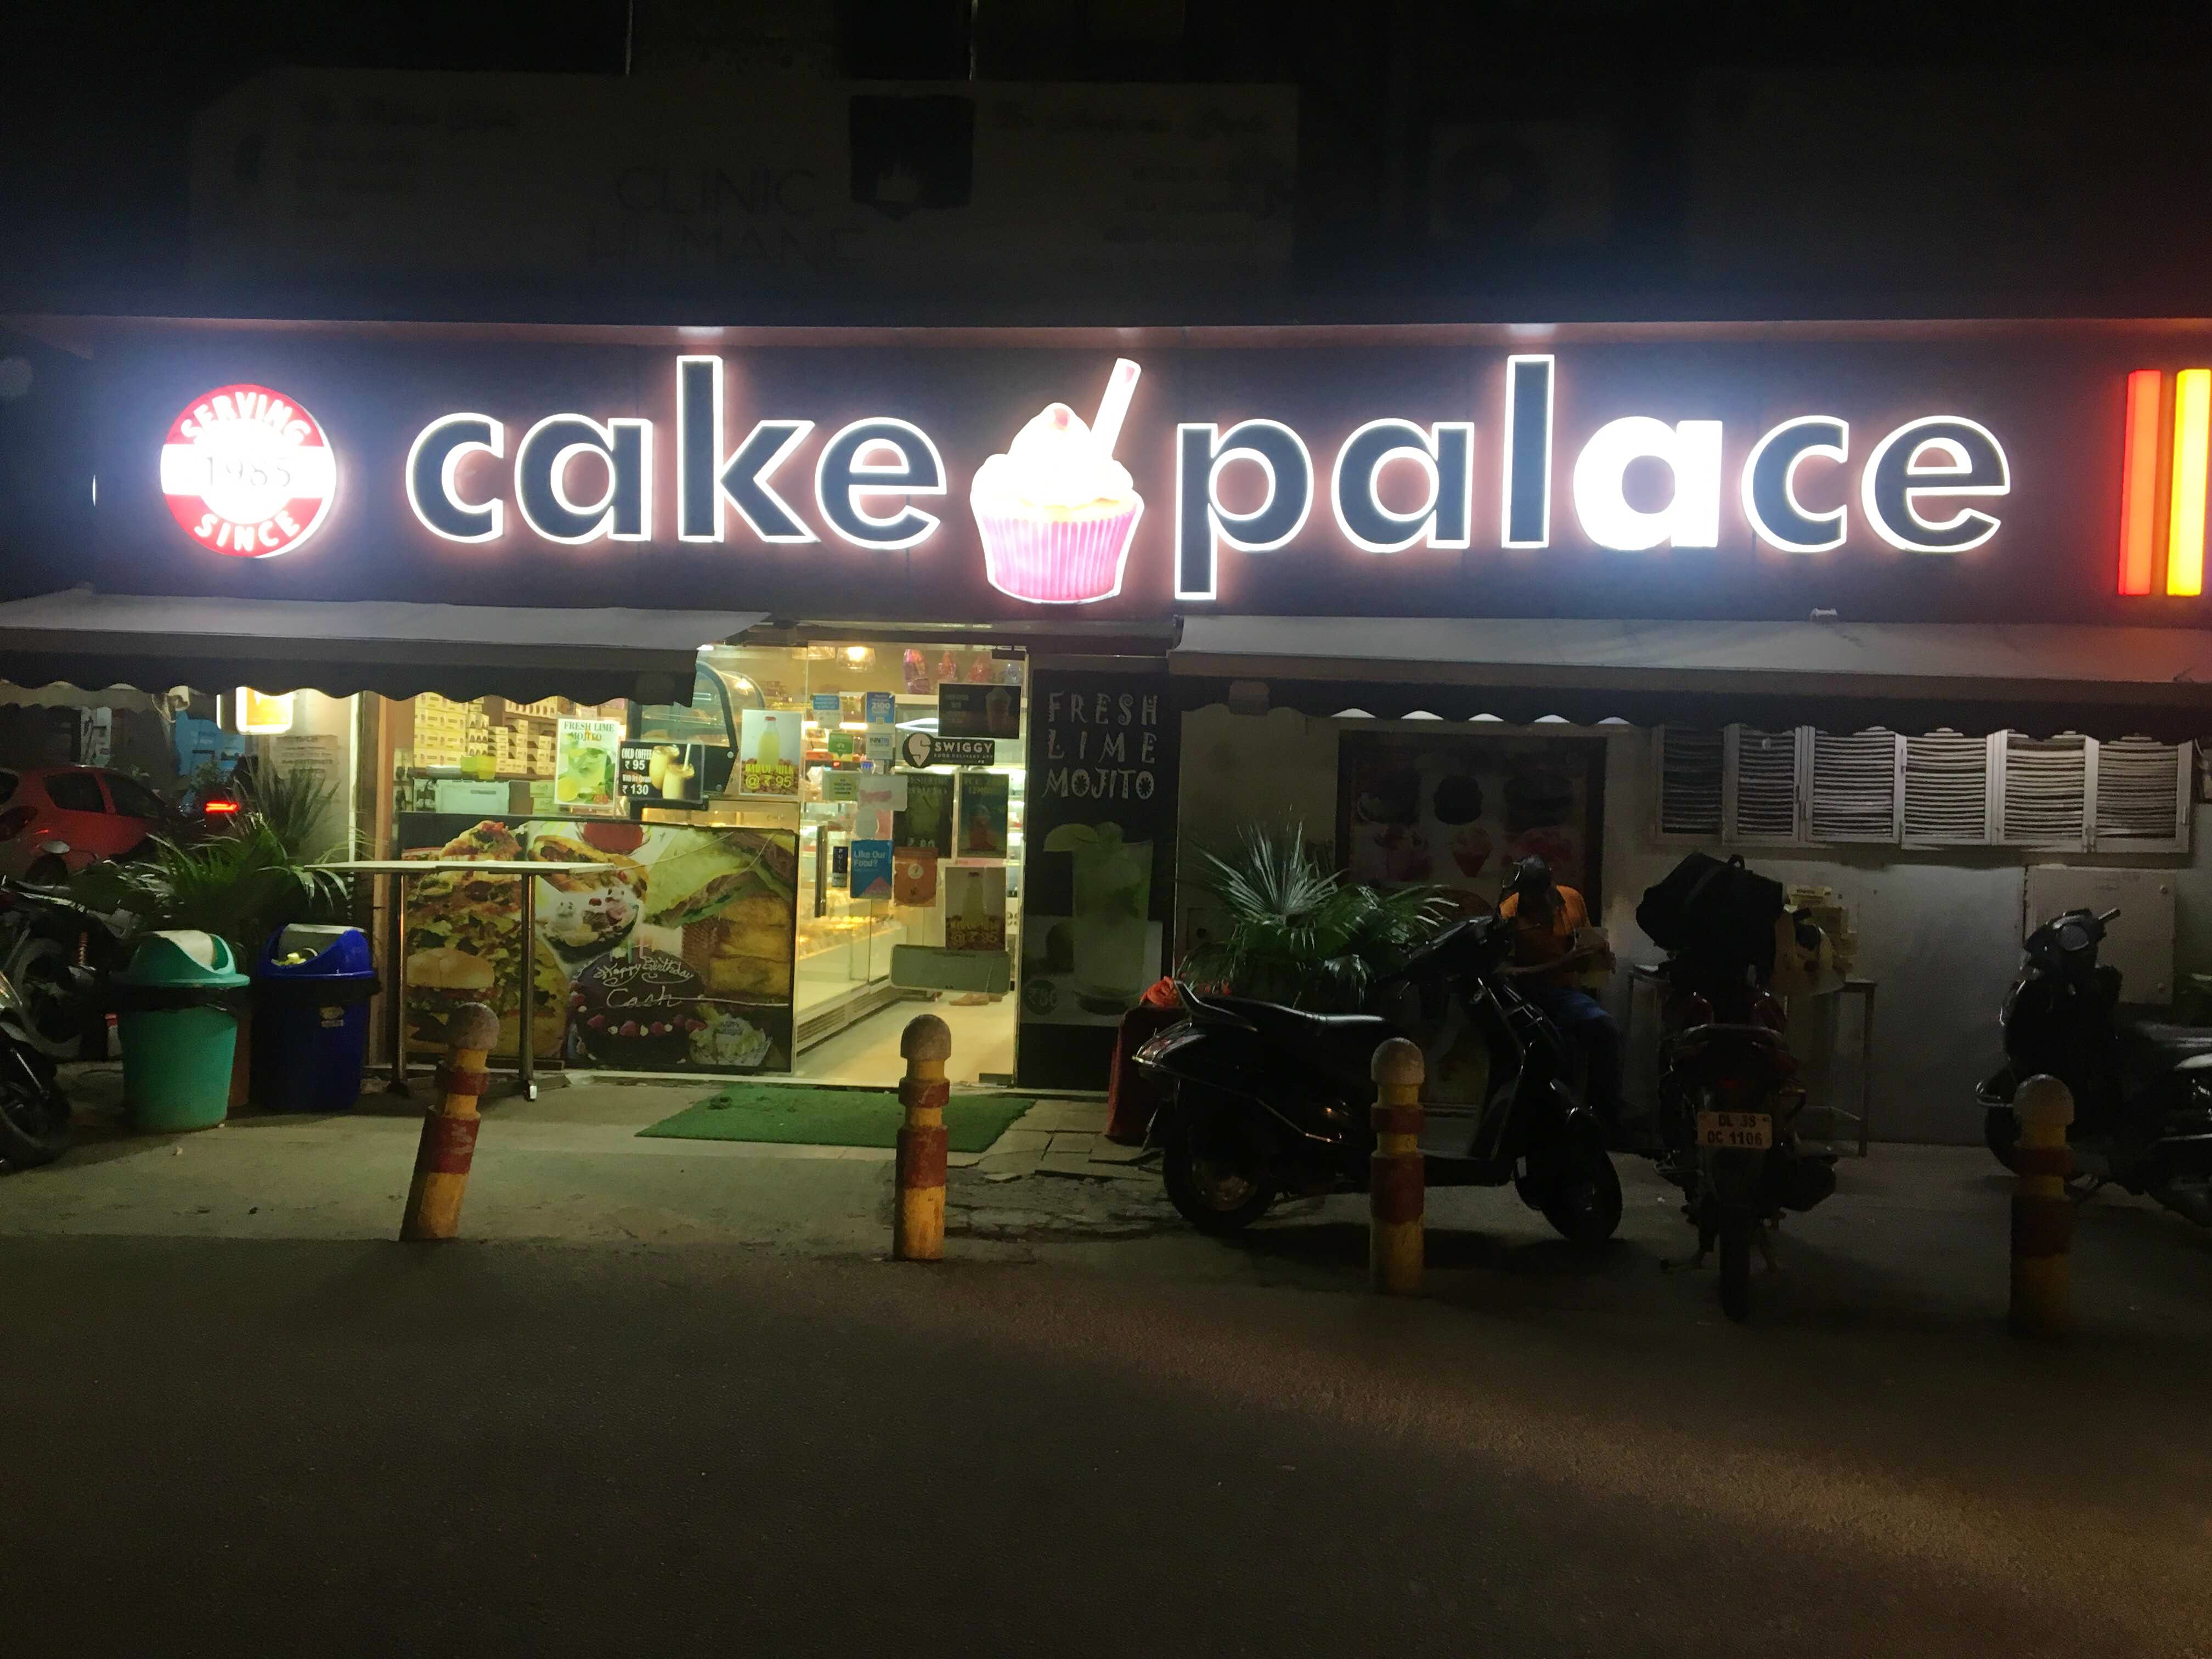 Photos of Cake Palace South Extension Part 2, Delhi | Cake Palace Bakery  images in Delhi-NCR - asklaila